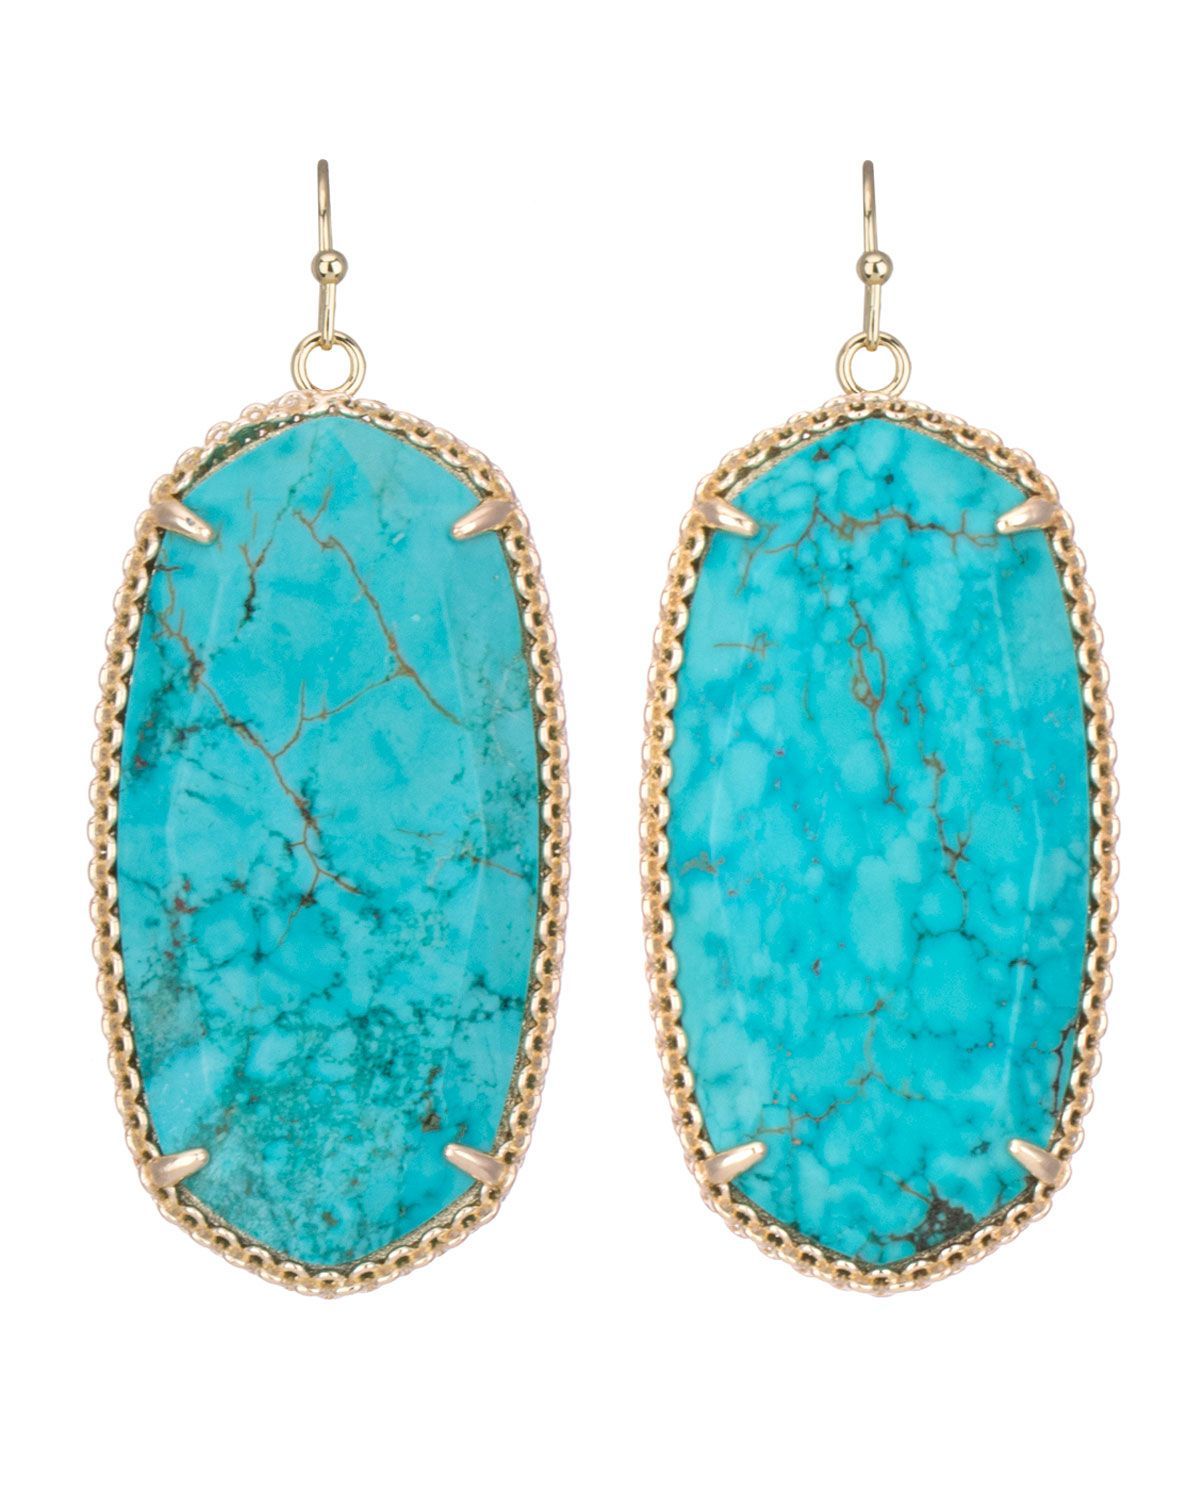 Have these! Love the crochet basket the turquoise is cradled in. Love Kendra Scott!